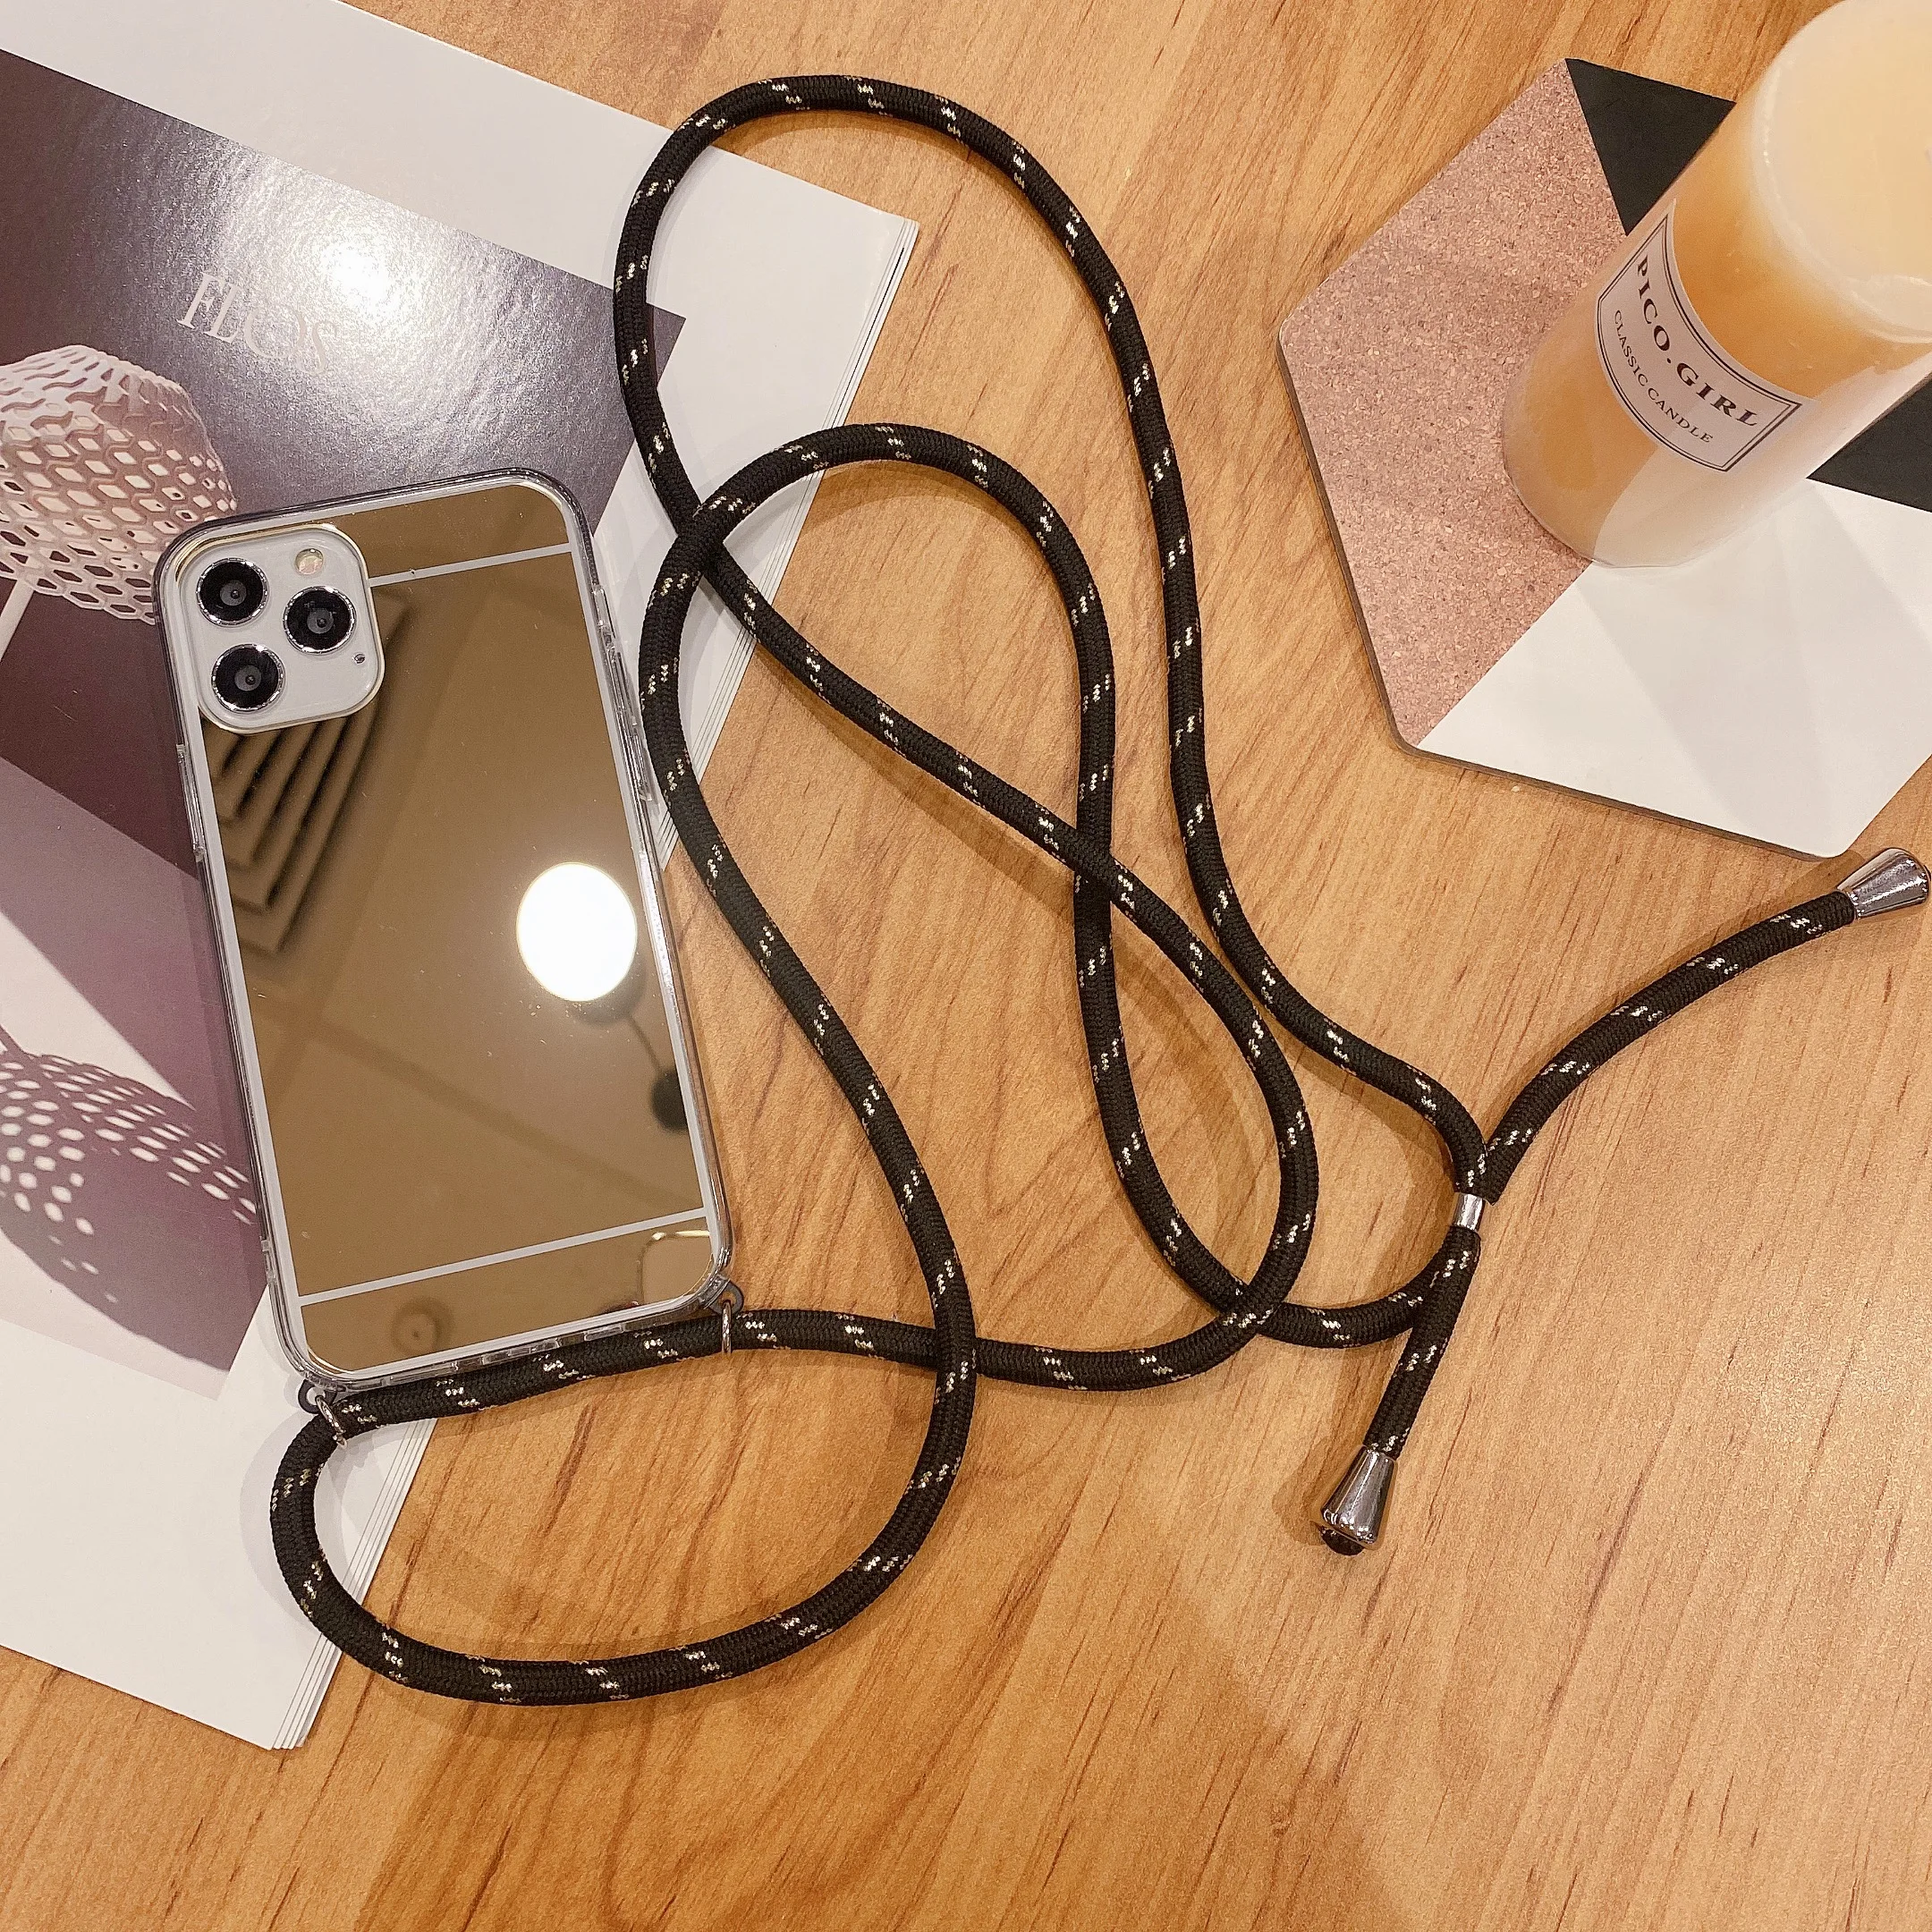 phonecase Fashion Make Up Mirror Phone Case for iPhone 12 Mini 11 Pro XS Max XR 7 8 Plus Necklace Cord Chain Hanging Rope Crossbody Cover peel case